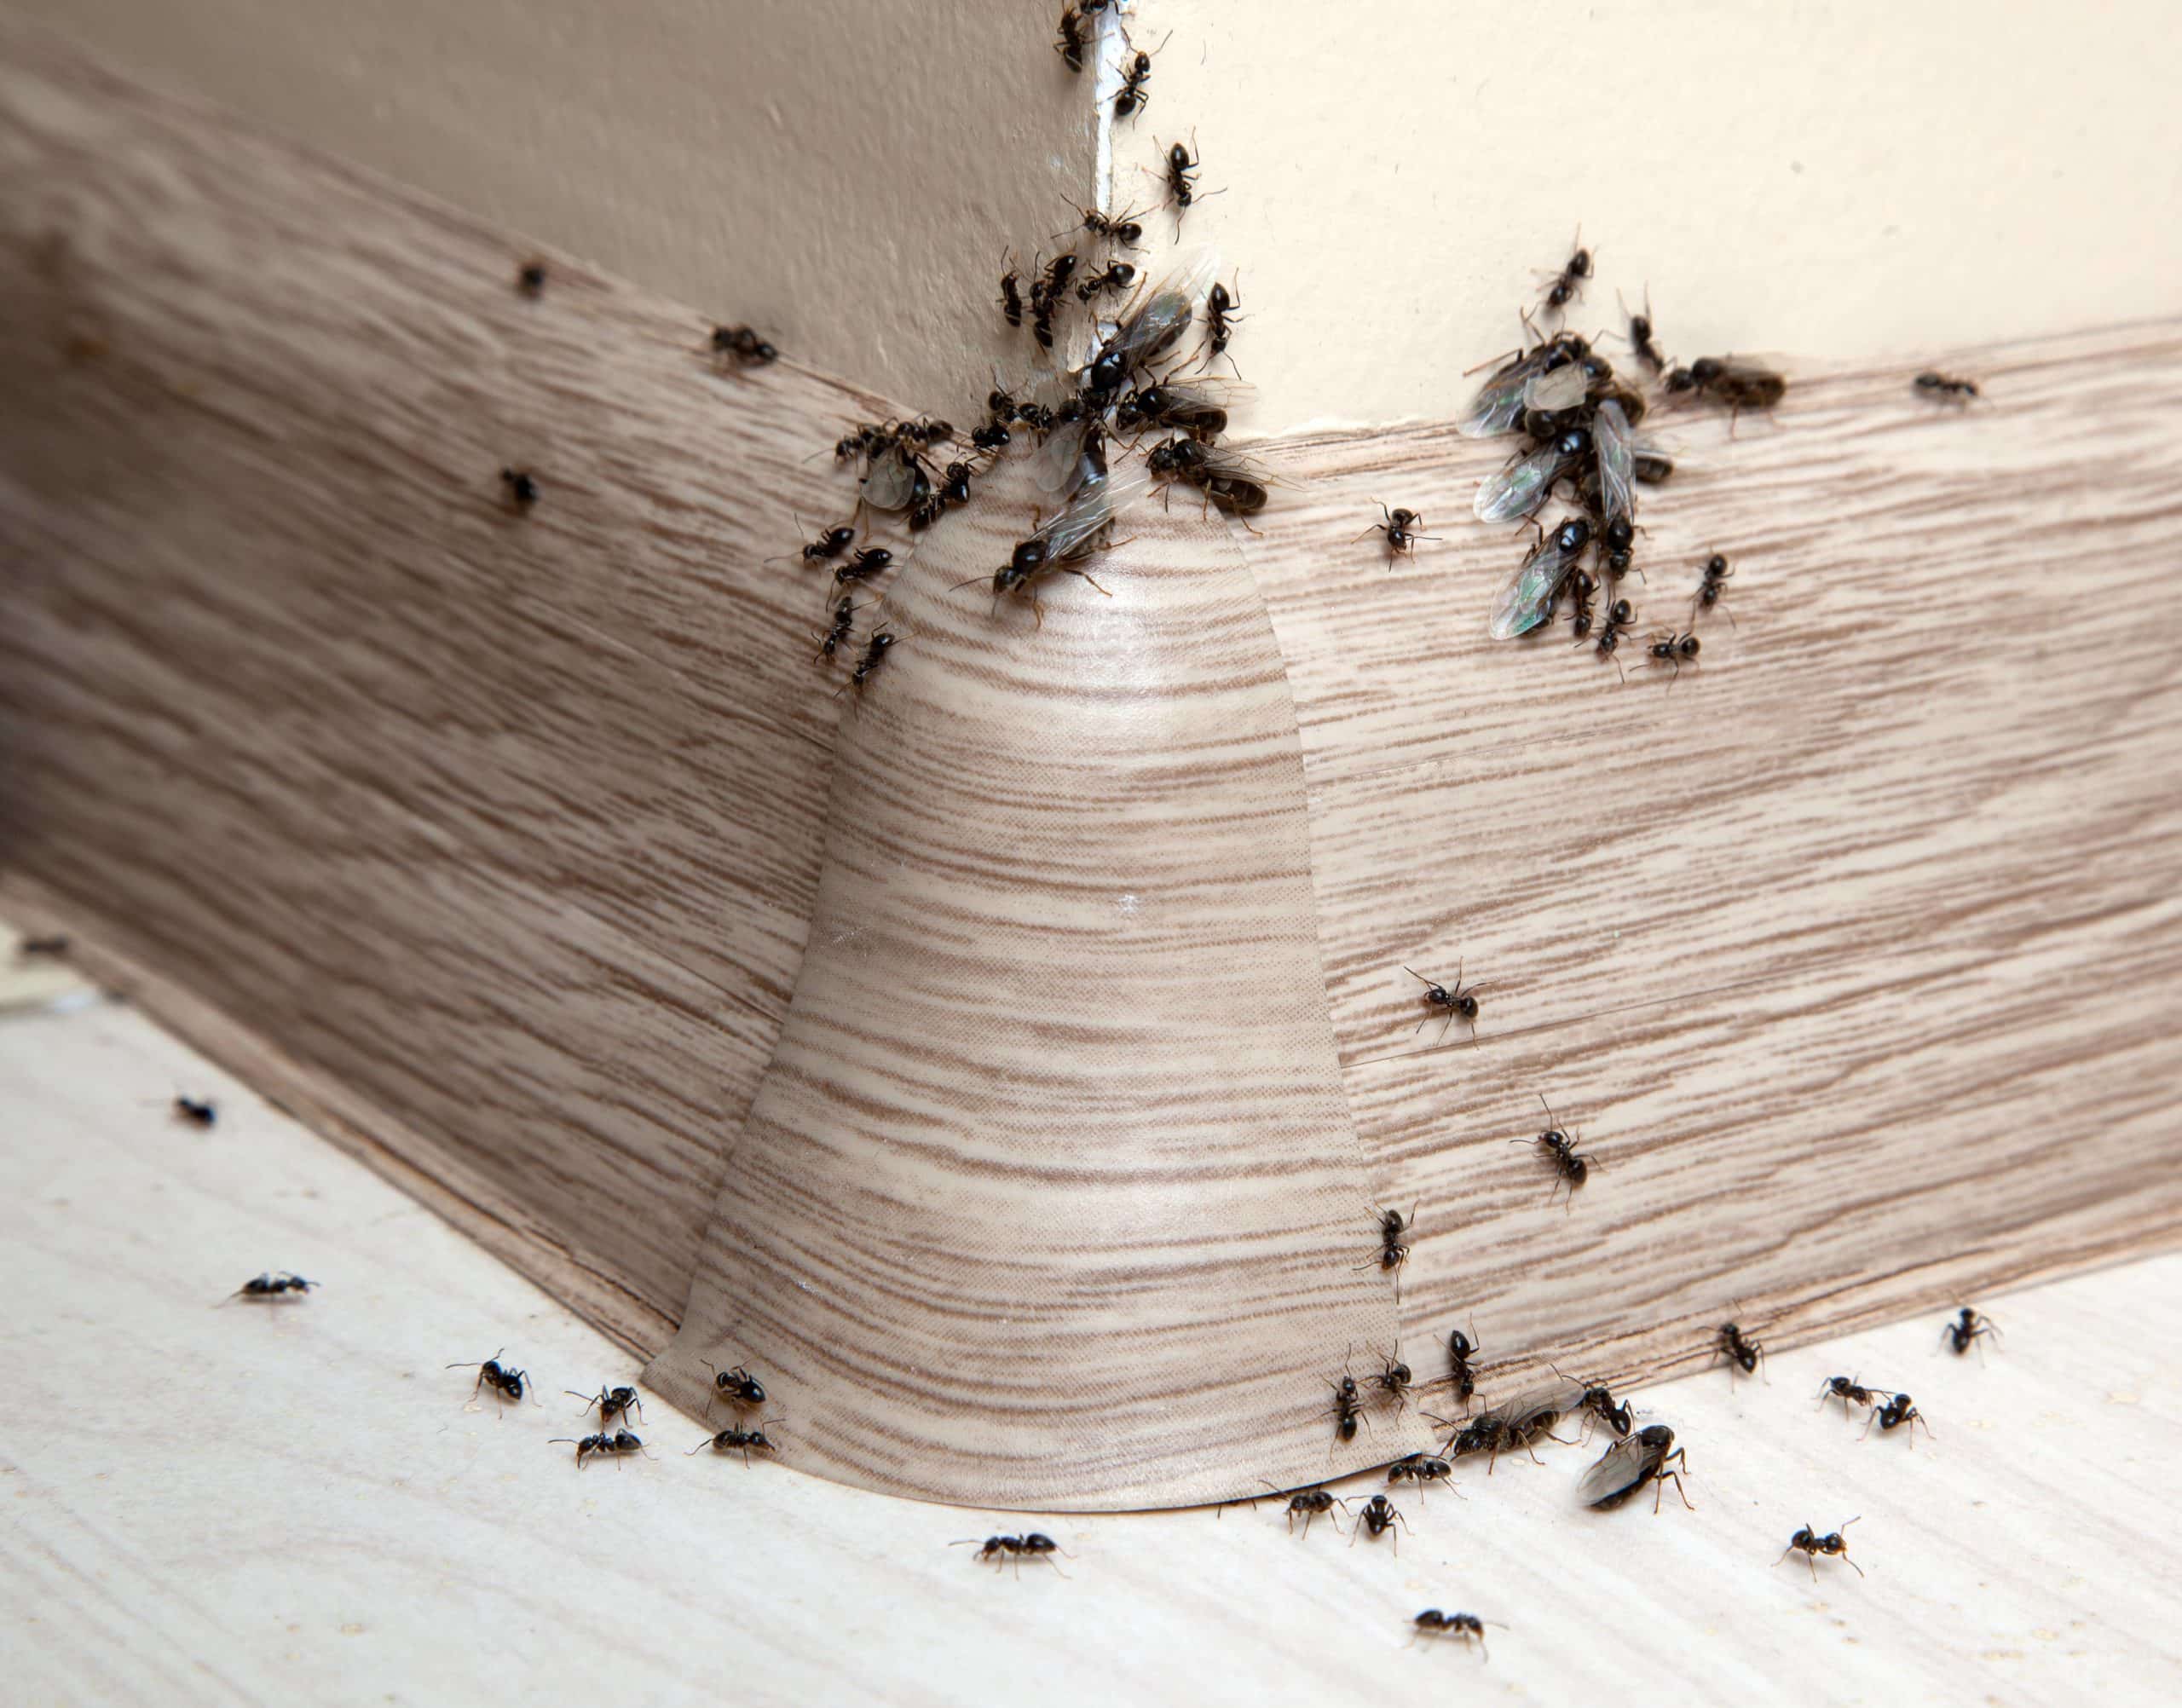 How To Get Rid Of Ants From Your Home Using Natural Remedies